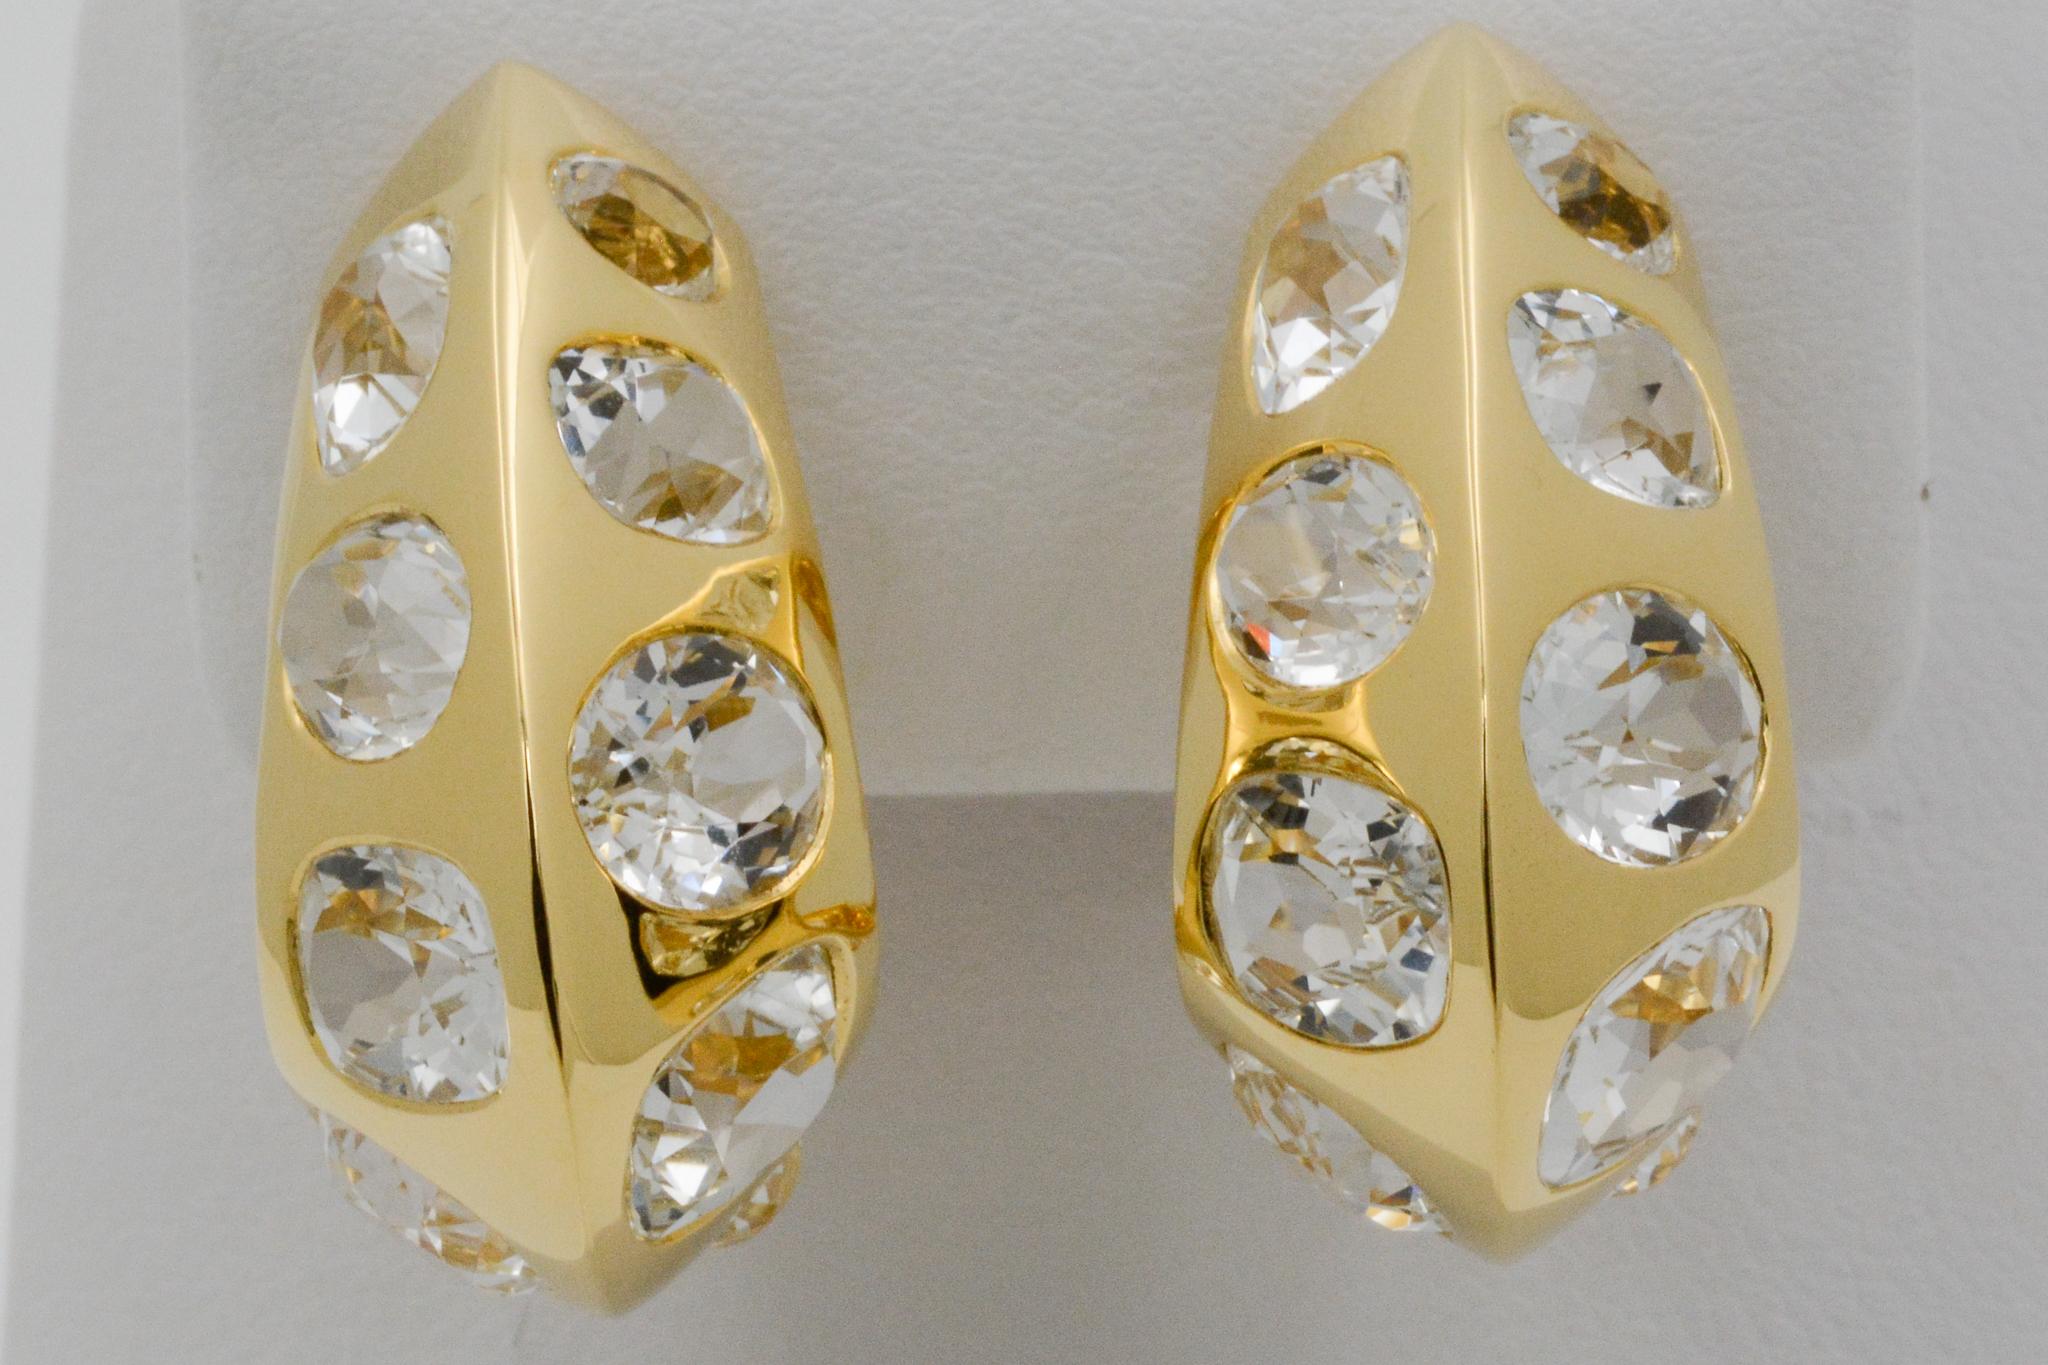 These Seaman Schepps 18k yellow gold Antibes earrings feature white topazes. The earrings have a J hoop style with a peaked dome shape and polished finish. The earrings also have clip backs and are signed Seaman Schepps.